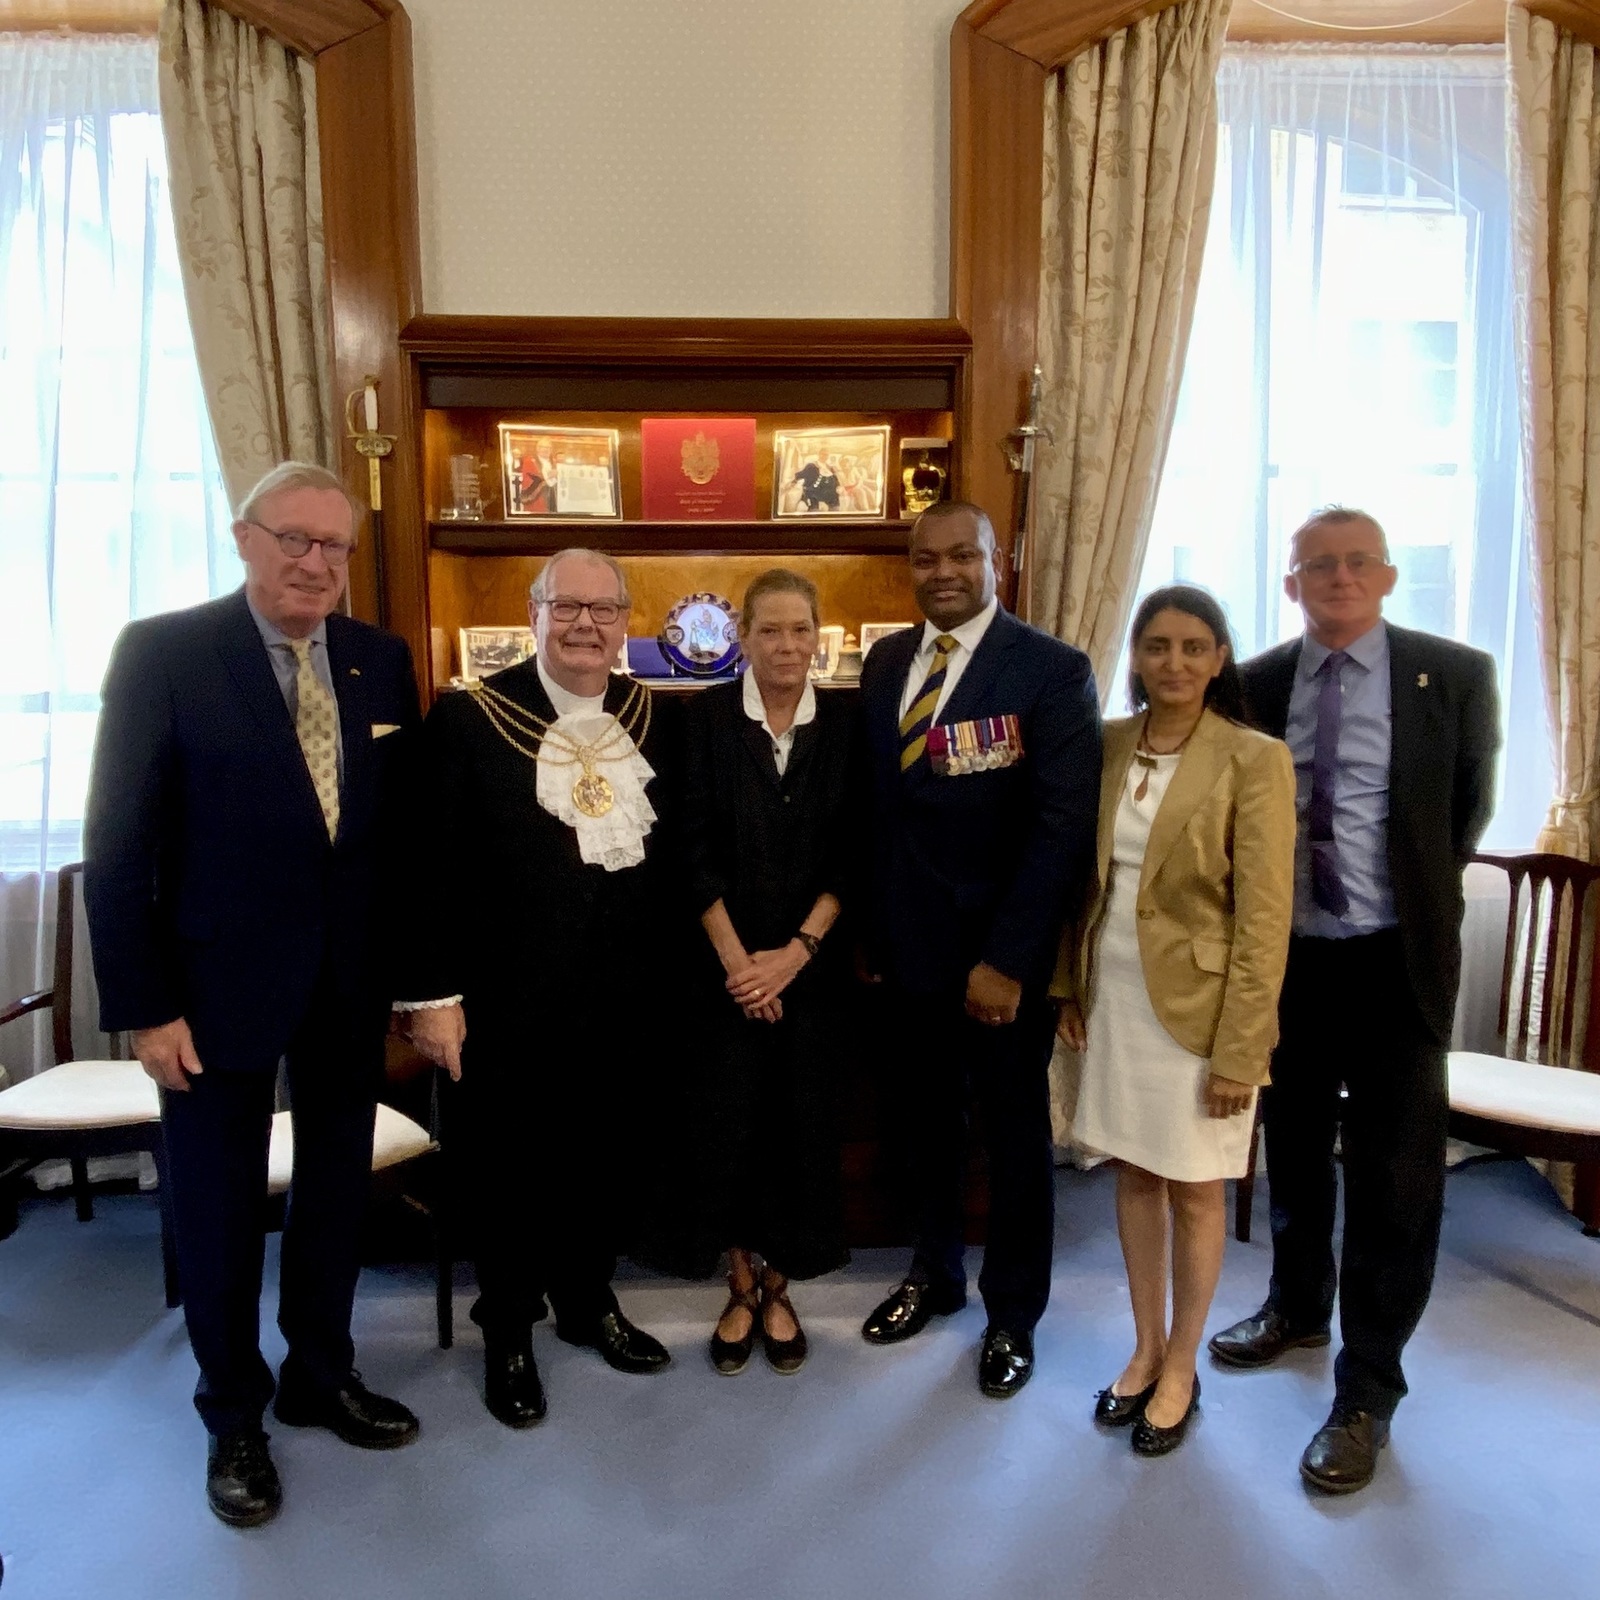 18 July 2023 - Honoured to host the amazing Johnson Beharry VC of JBVC Foundation, Aneeta Prem MBE of Freedom Charity, Patrick Green of The Ben Kinsella Trust and Lucy Keenan from The Hardman Trust at an Old Bailey luncheon.